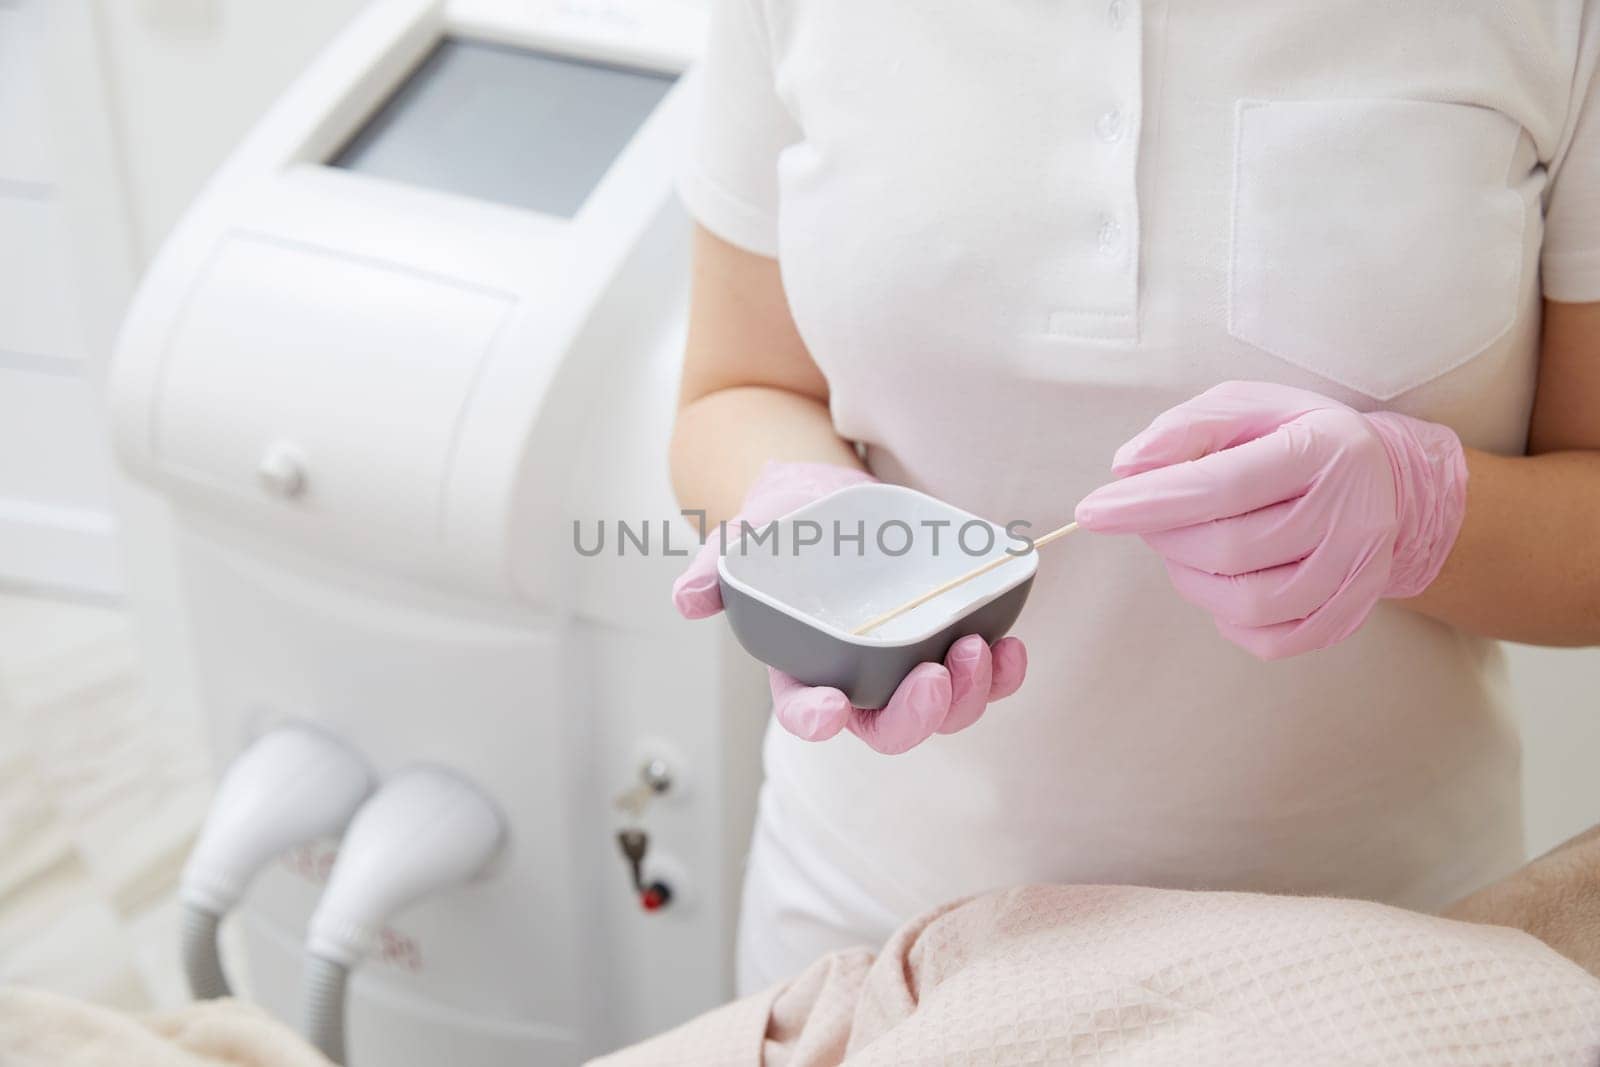 Cosmetologist applying gel before doing laser hair removal epilation on female leg in a salon by Mariakray